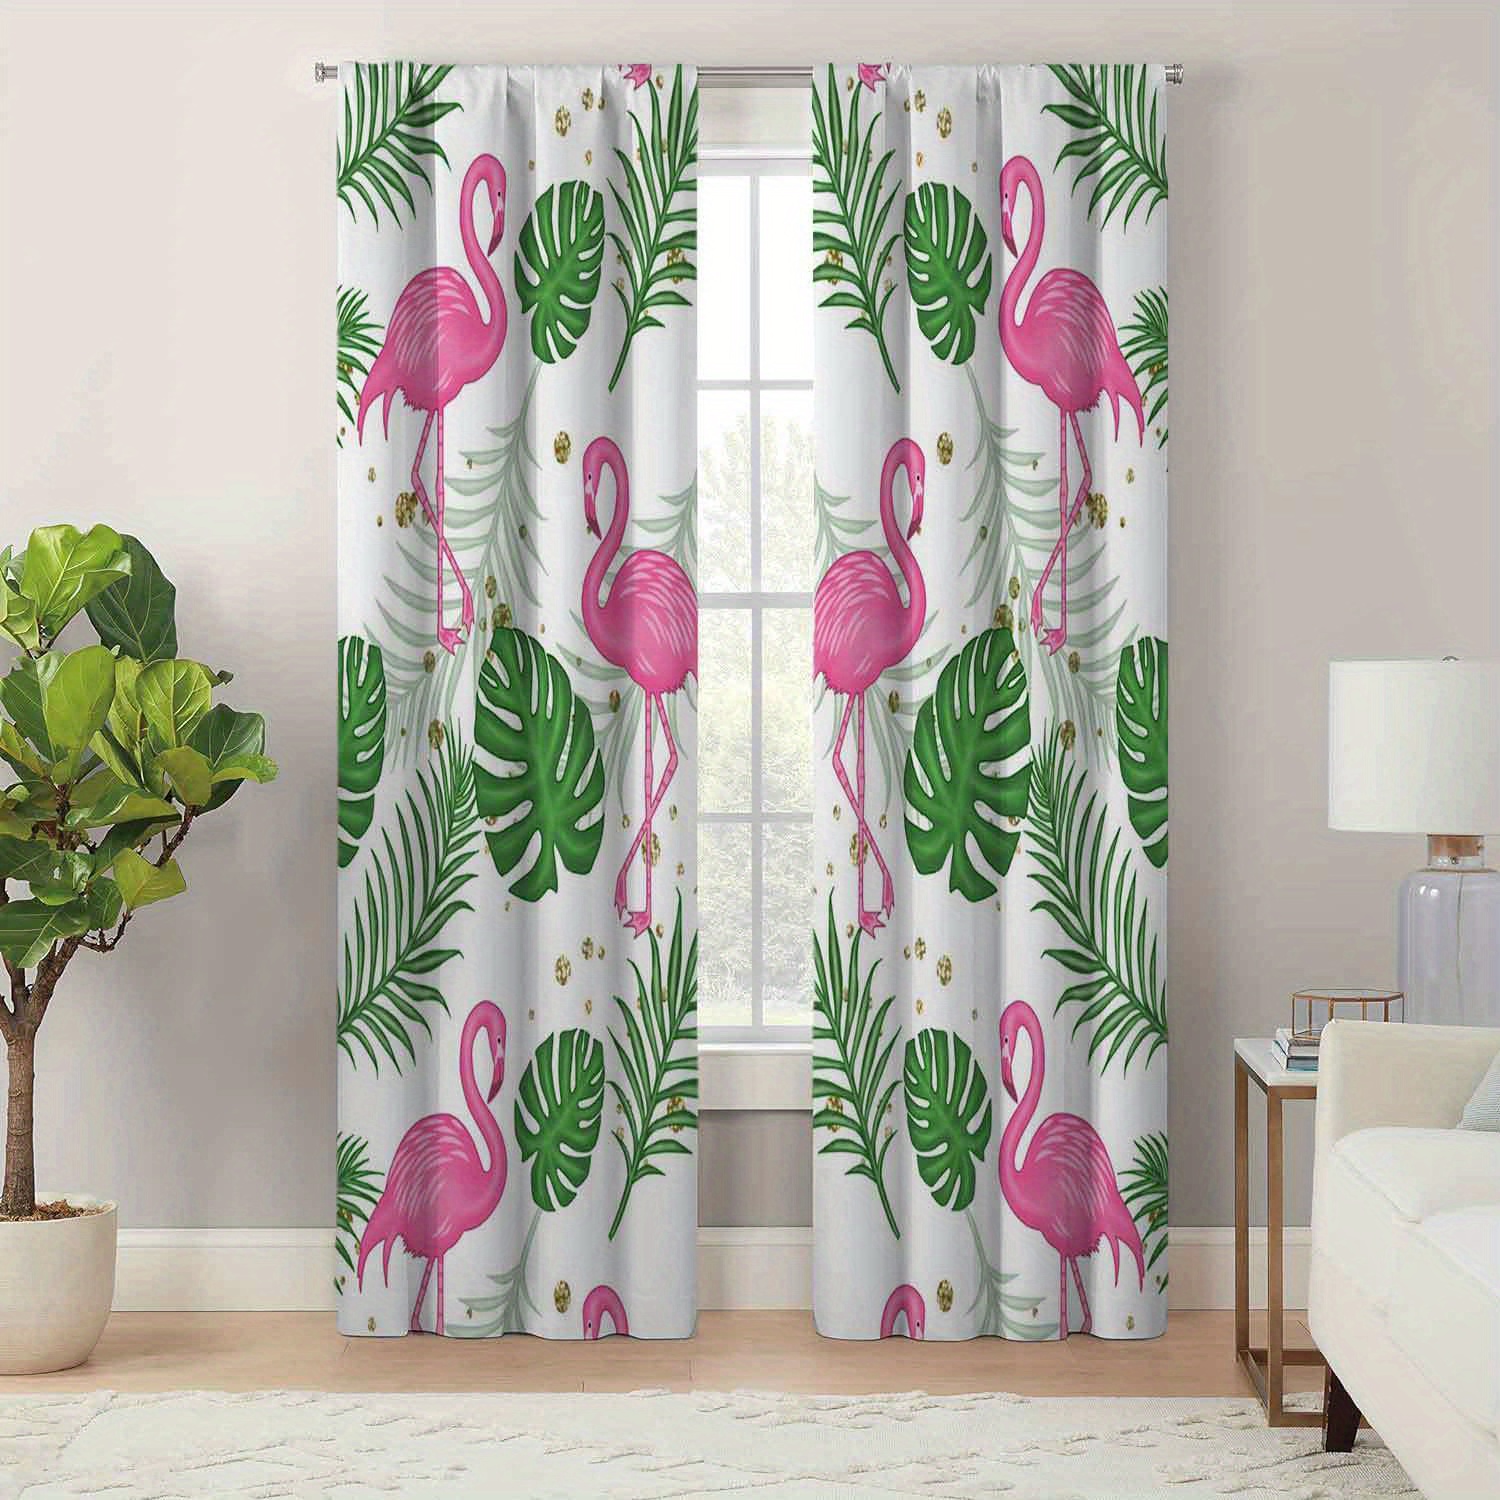 

Boho Chic Palm Leaf & Flamingo Print Curtains - Easy-care, Durable Polyester For Living Room & Bedroom Decor